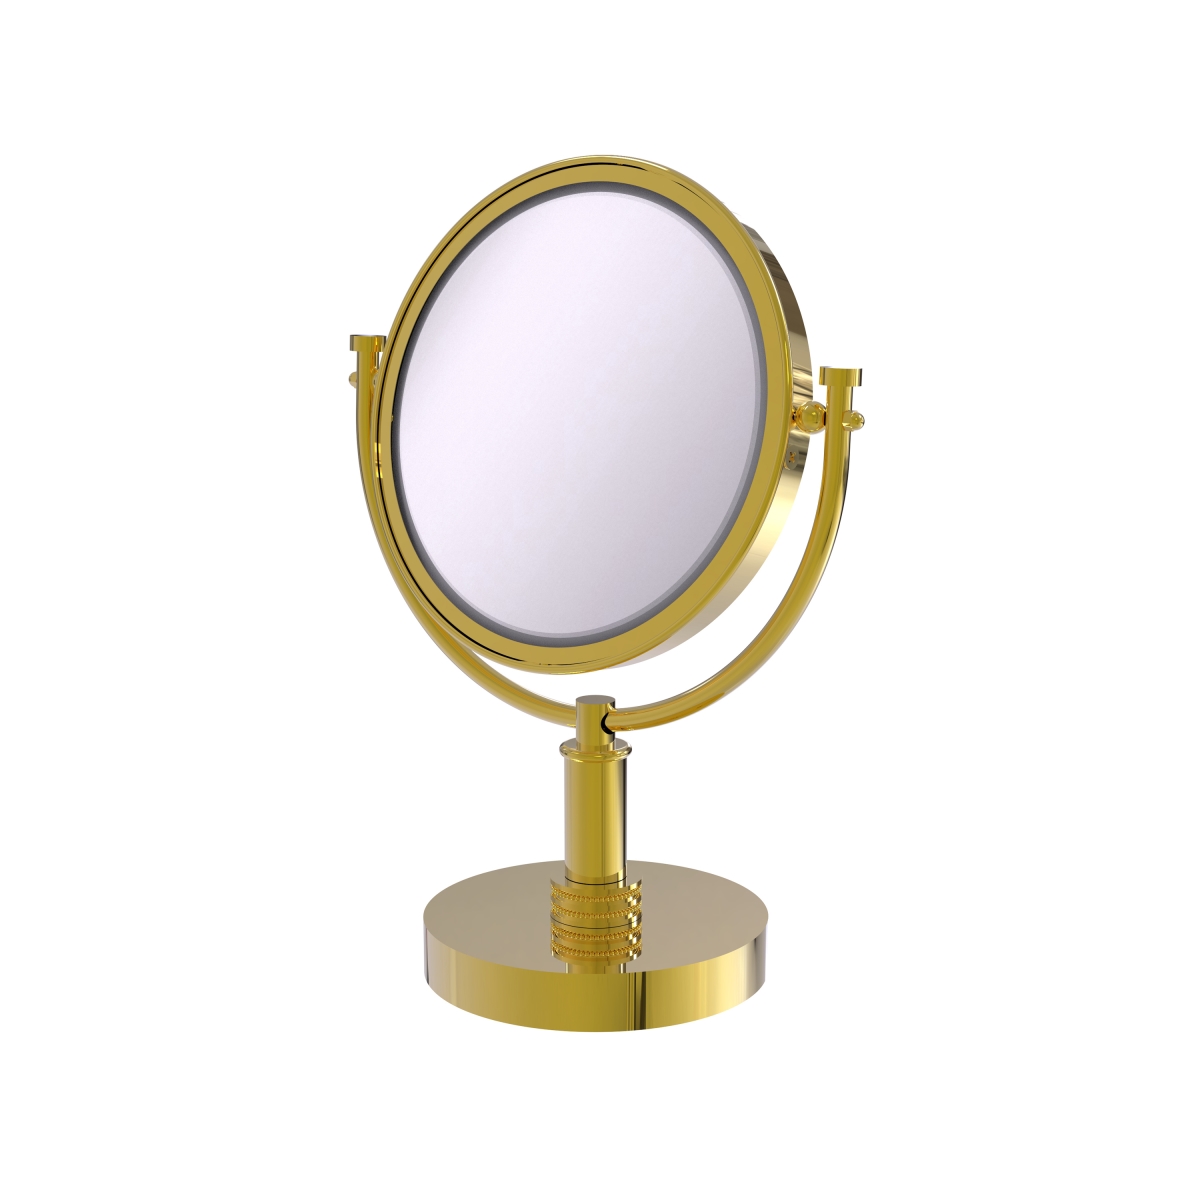 Picture of Allied Brass DM-4D-4X-PB 8 in. Vanity Top Make-Up Mirror 4X Magnification, Polished Brass - 15 x 8 x 8 in.